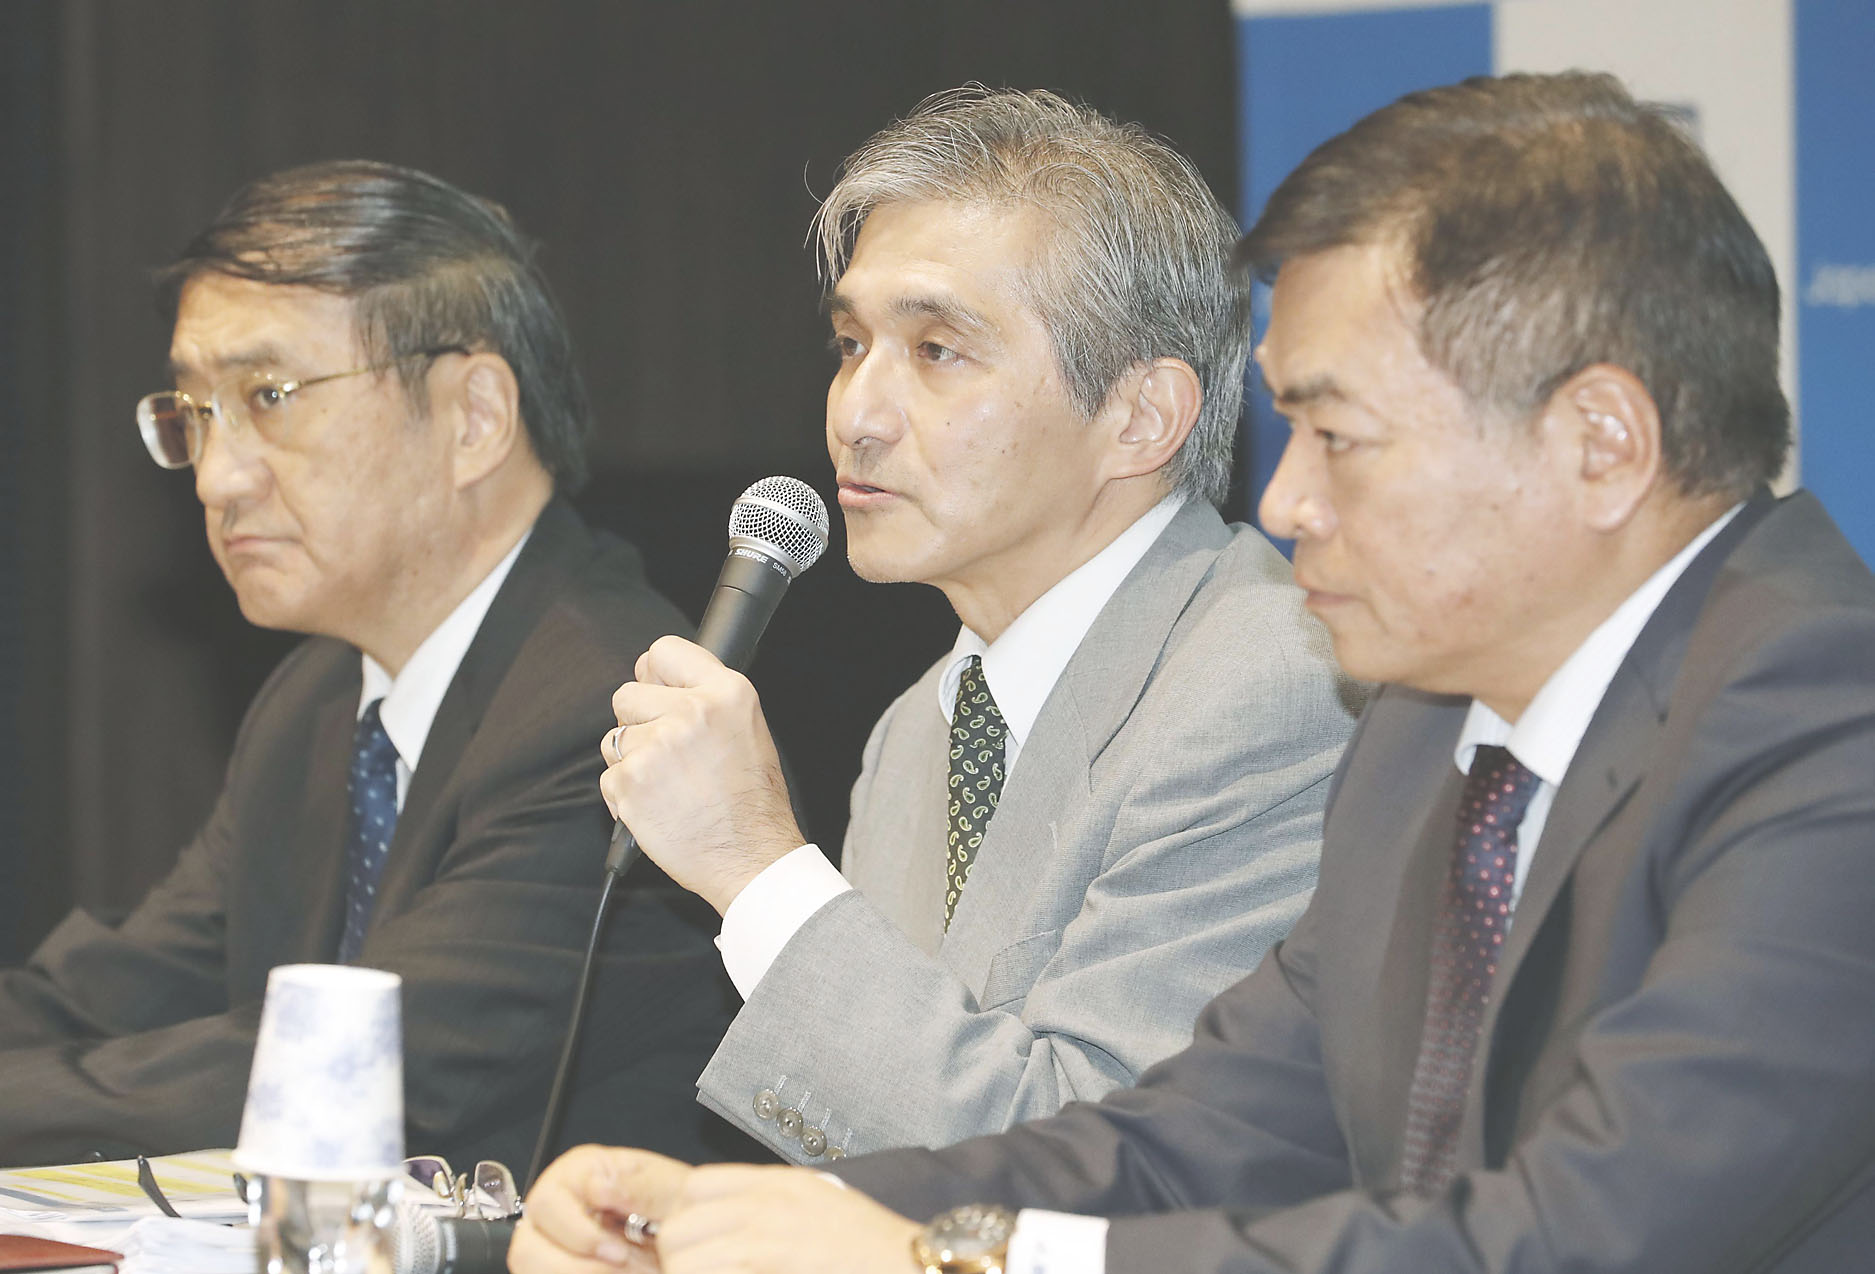 Minoru Kikuoka, then-chief financial officer and now CEO at Japan Display Inc., attends a news conference in Tokyo last month. | KYODO